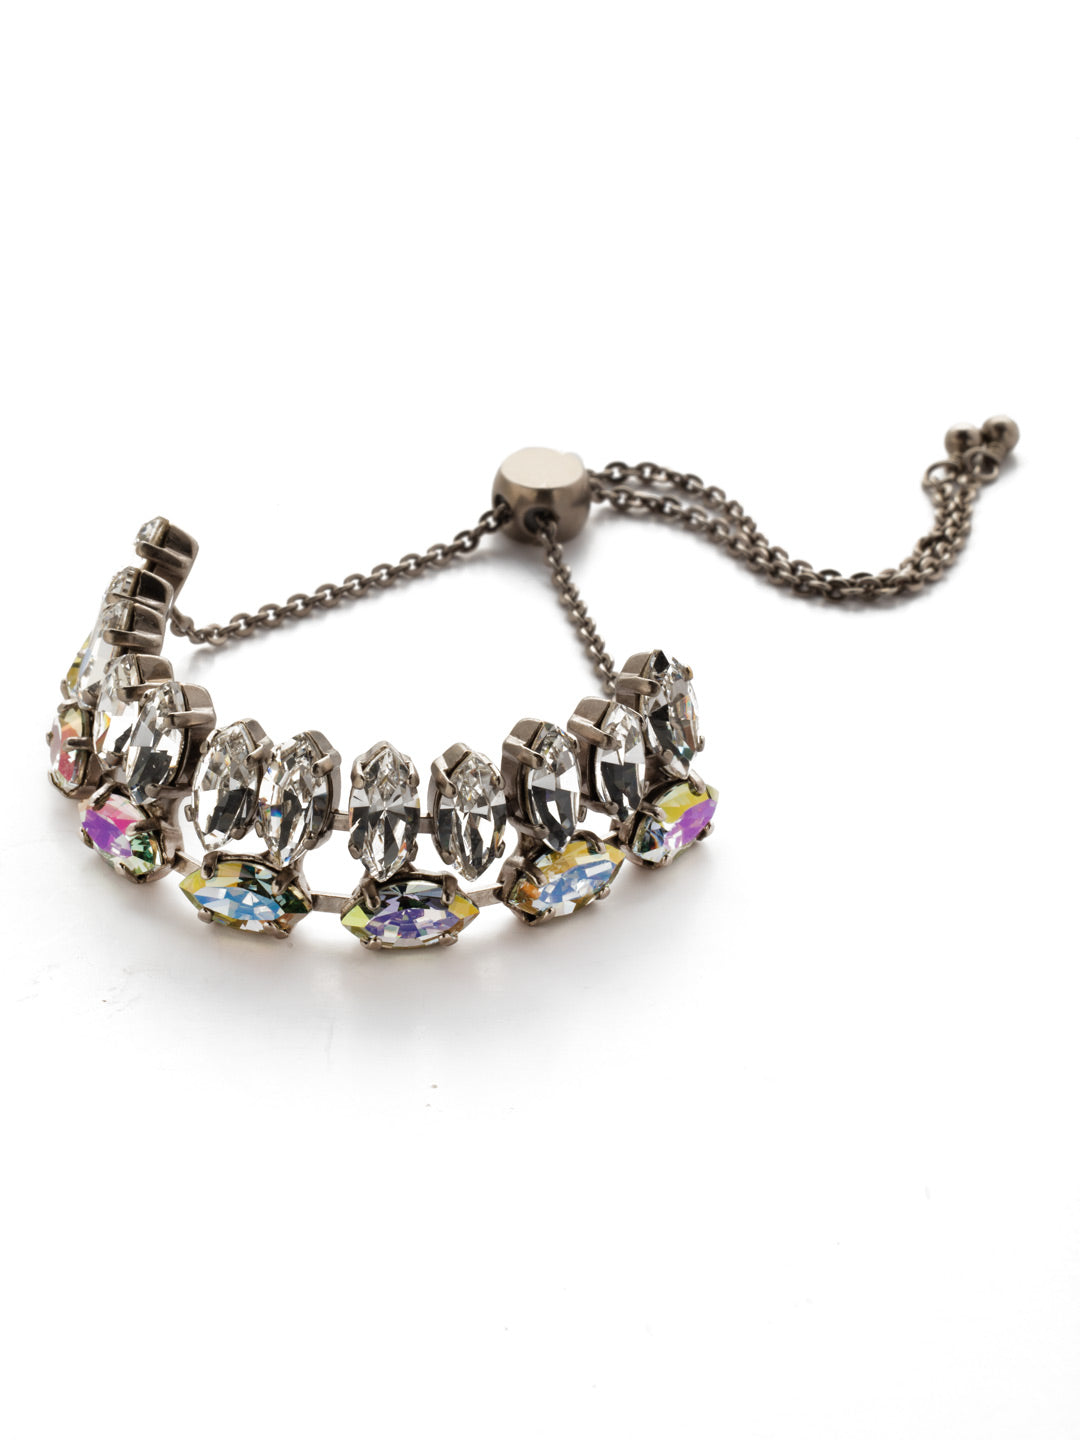 Anita Slider Bracelet - BEP29ASCRE - <p>The Anita Slider Bracelet is boldly beautiful. Its double-layer of navette stones placed in opposite directions offers some serious crystal sparkle. From Sorrelli's Crystal Envy collection in our Antique Silver-tone finish.</p>